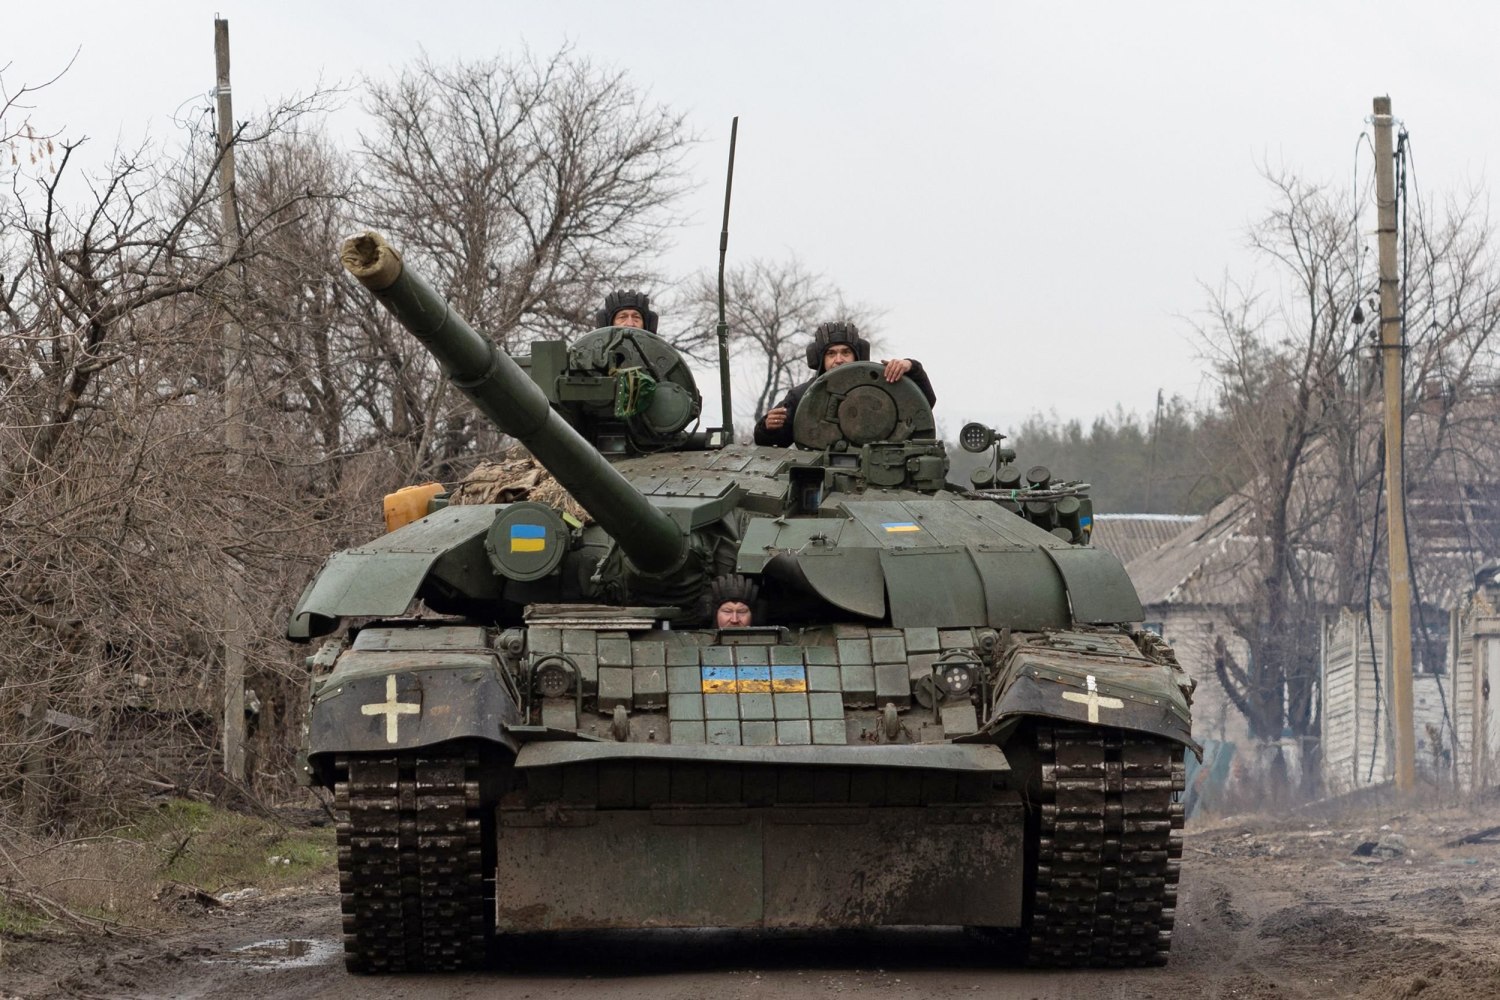 Germany and U.S. Pledge to Send Battle Tanks to Ukraine - The New York Times